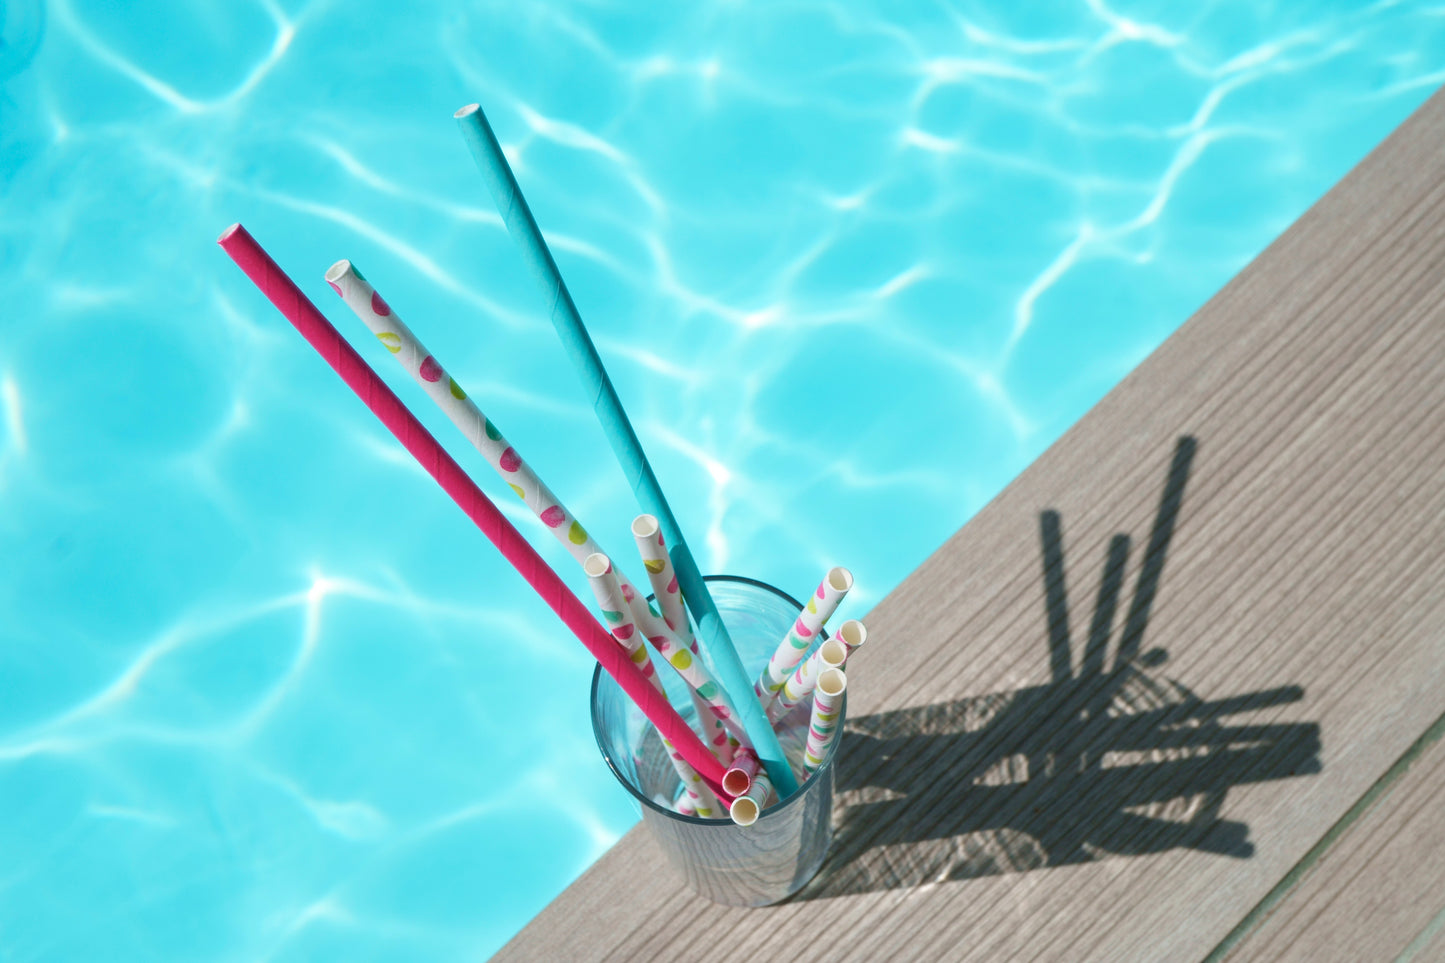 Straws By The Pool 4 - DSC01930 - Photo - Photographer Martin Fisher